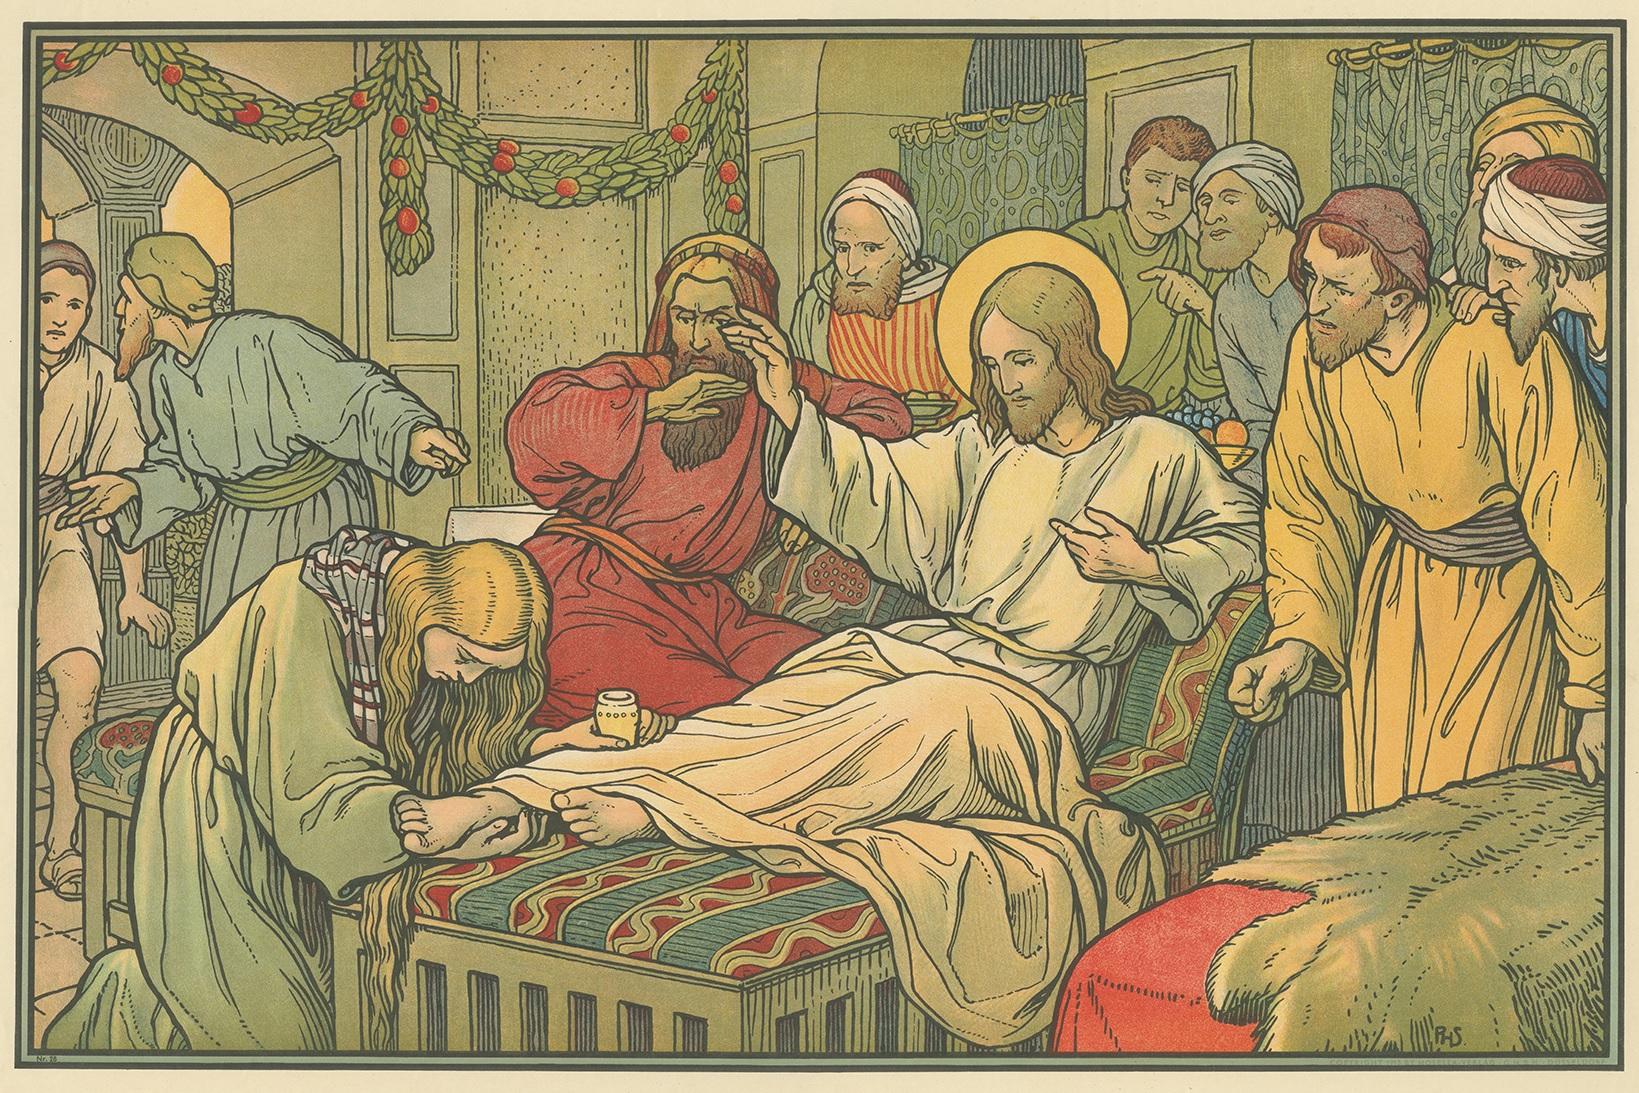 Large antique print of Christ and the Penitent Sinners. Published by Mosella-Verlag, 1913. This print originates from a series titled 'Kathol. Schulbibelwerk von Dr. Ecker'.